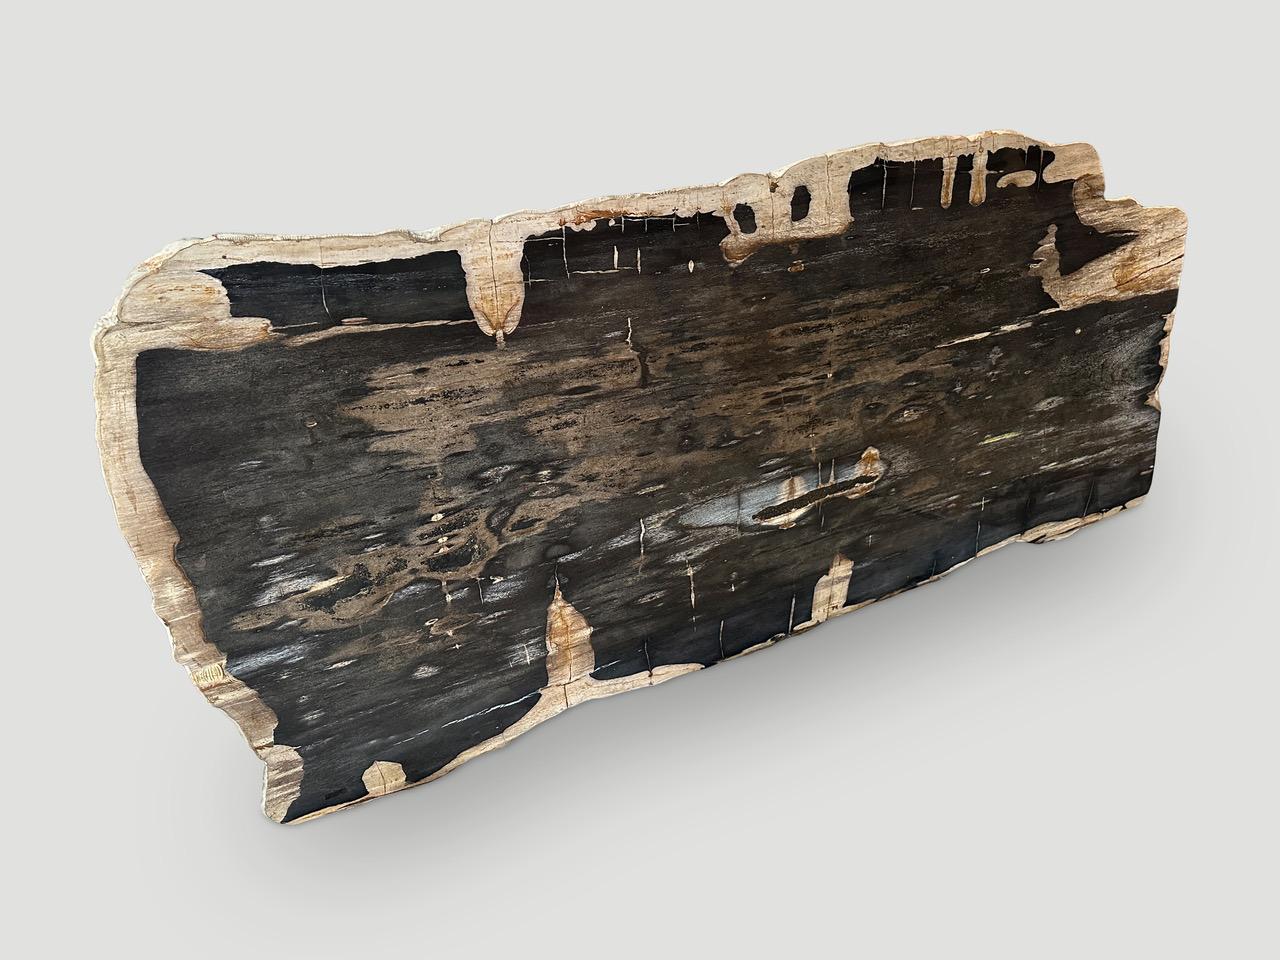 Impressive live edge single slab with stunning natural, contrasting markings. This can be made into a dining table, coffee table or counter top. The live edge is 34